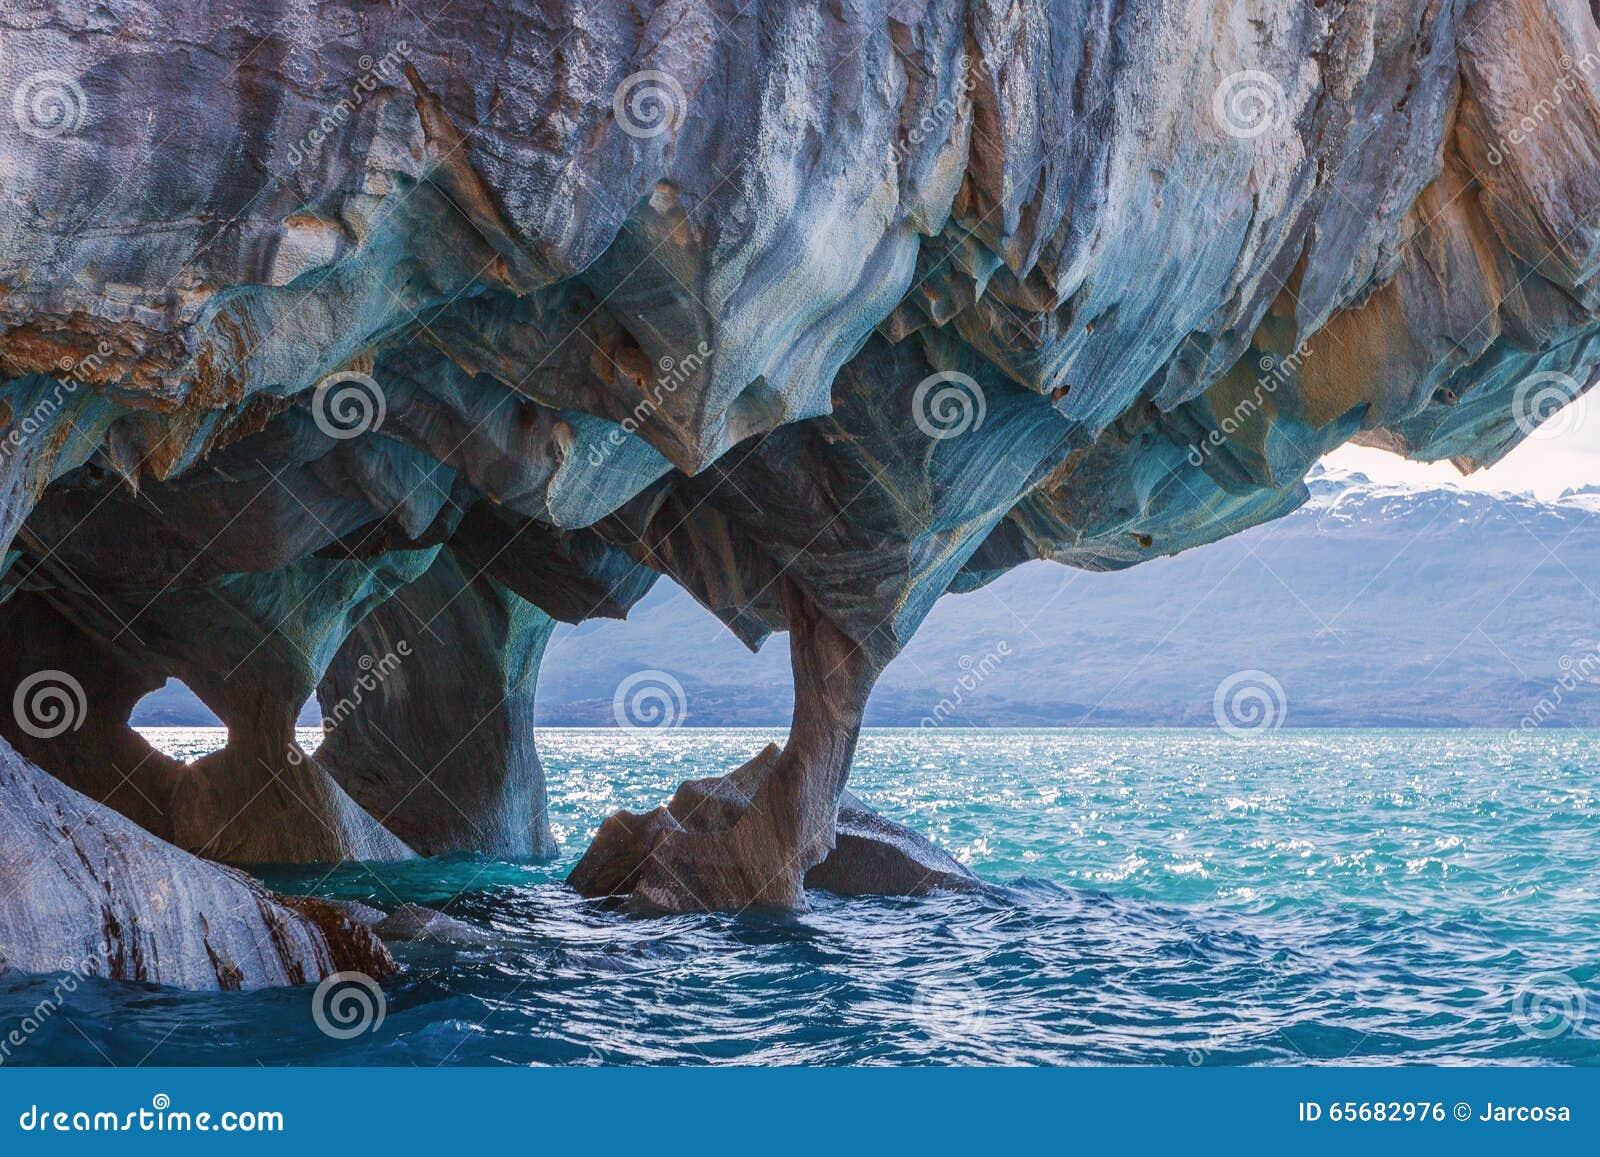 marble caves, patagonia chilena